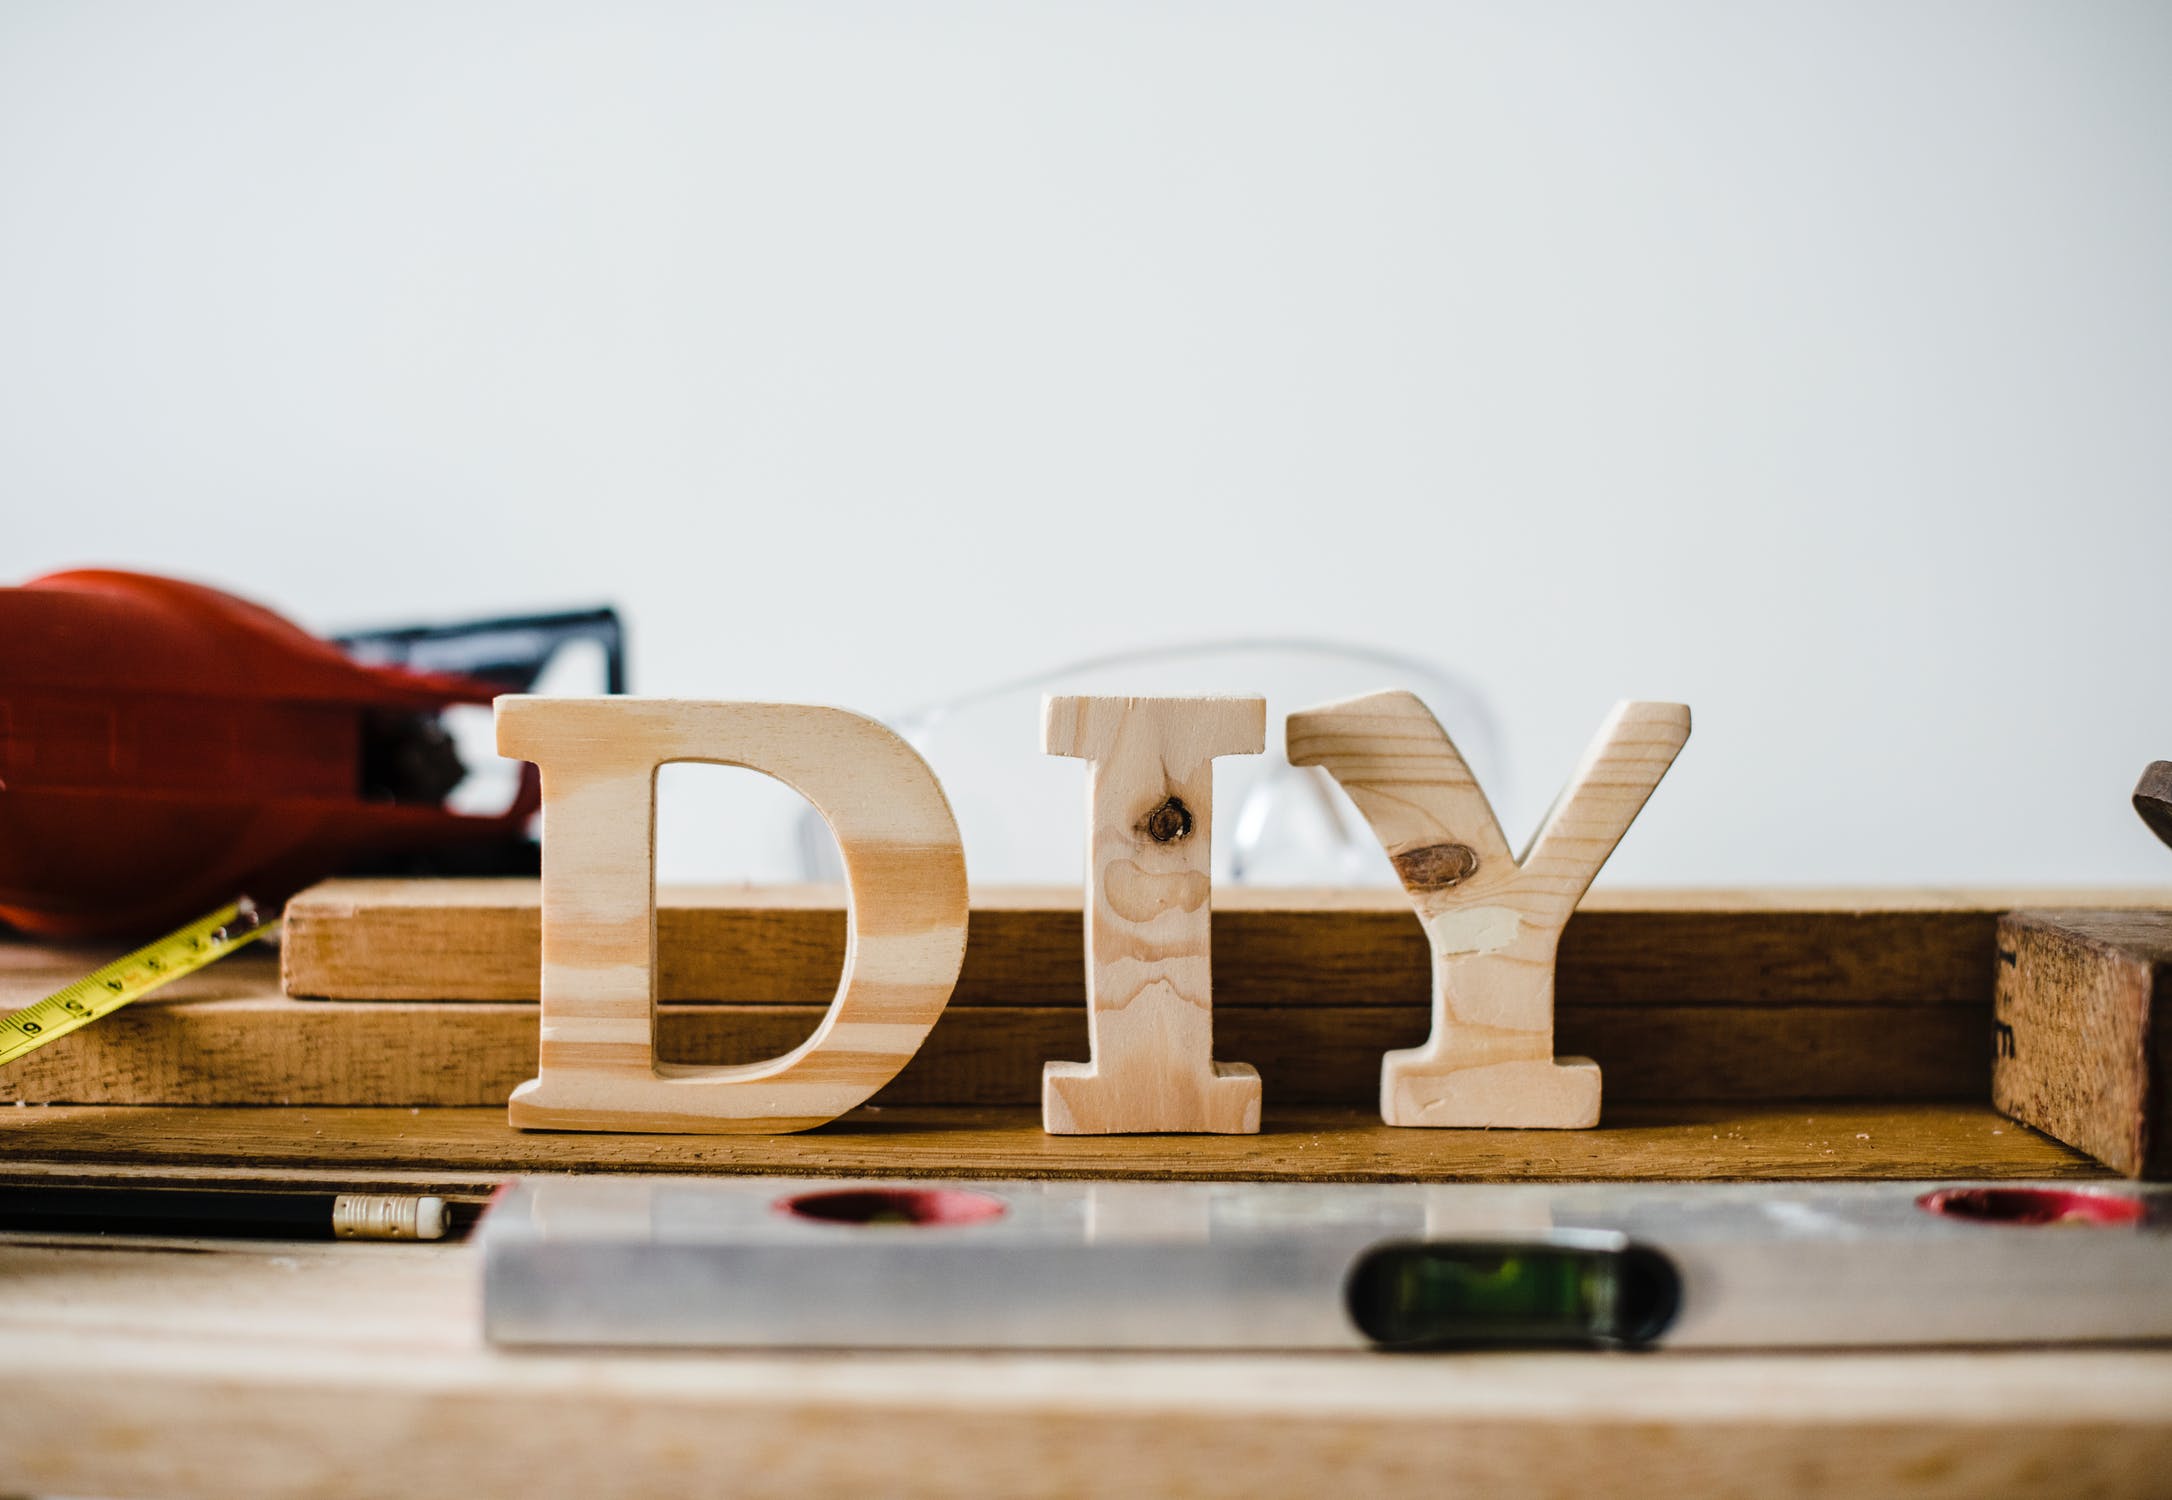 Eco DIYs: Why Buy It When You Can Make It Yourself?